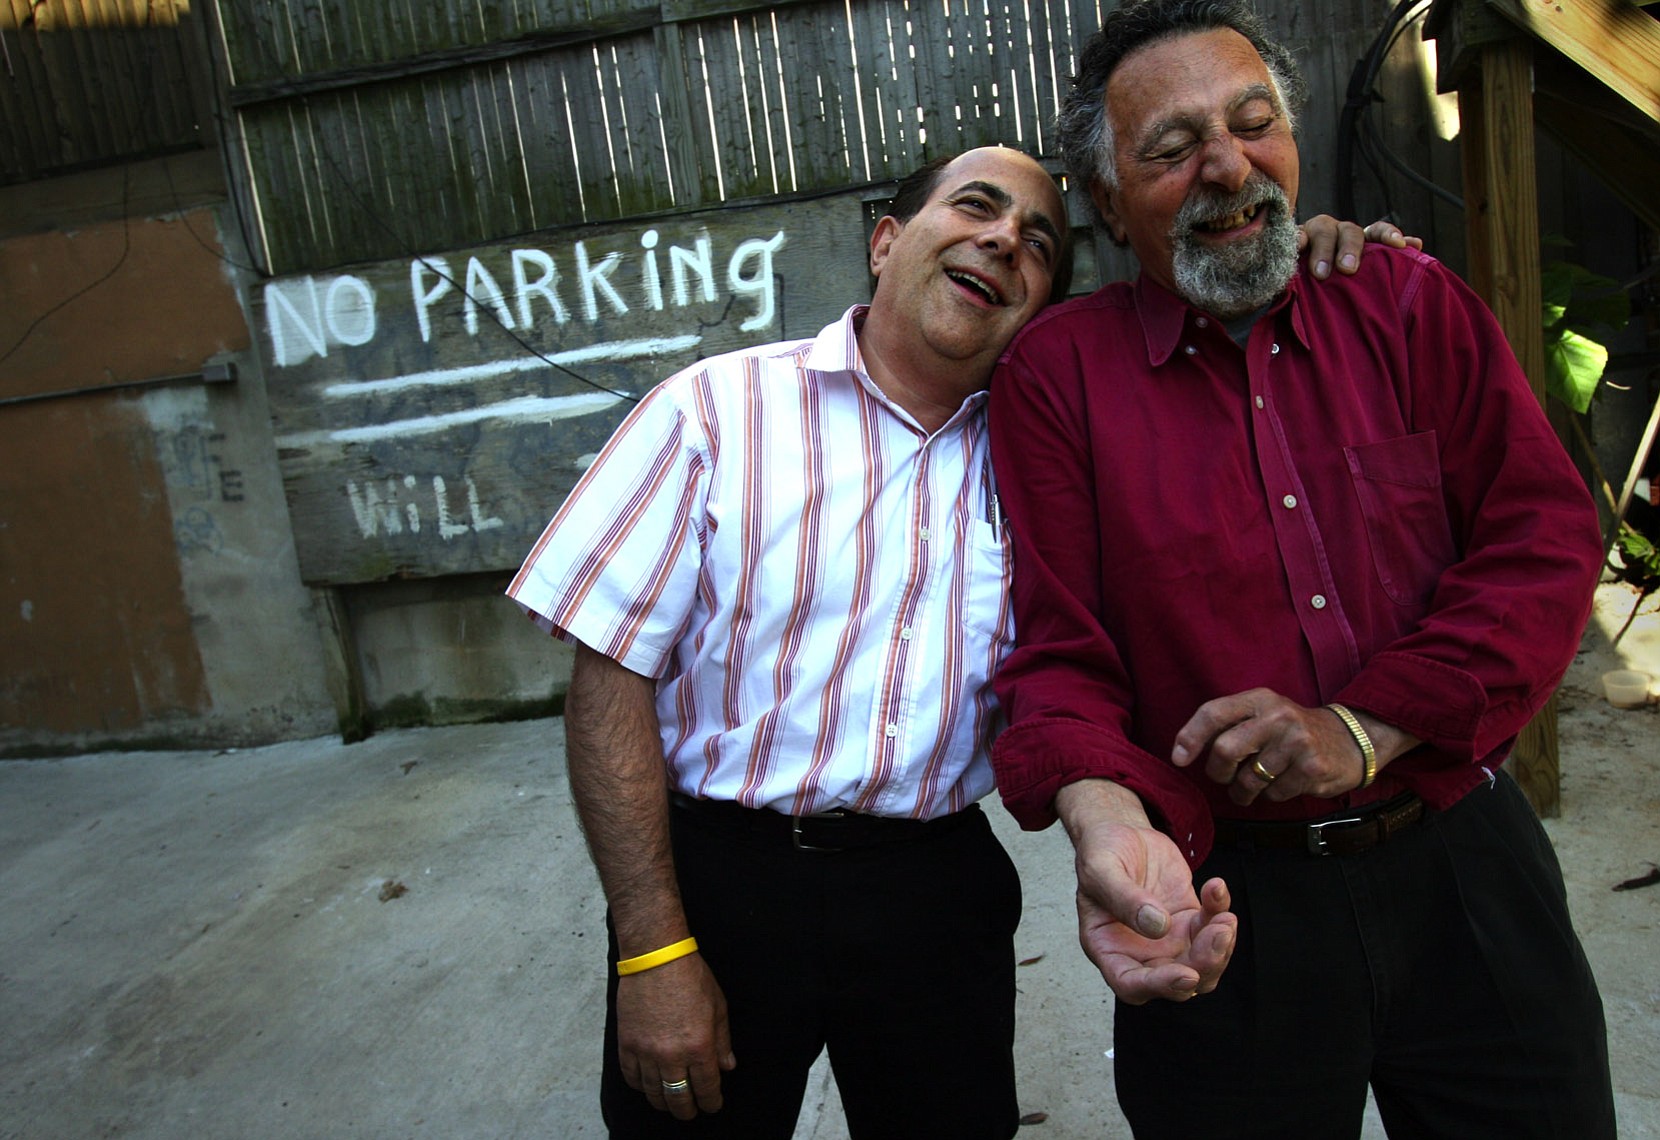 The Washington Post files
Ray Magliozzi, left, and his brother Tom Magliozzi, hosts of the National Public Radio program &quot;Car Talk,&quot; are seen in Washington, D.C., in 2005. Tom Magliozzi, half of the beloved car repair duo who called themselves &quot;Click and Clack: The Tappet Brothers,&quot; died Monday at age 77.